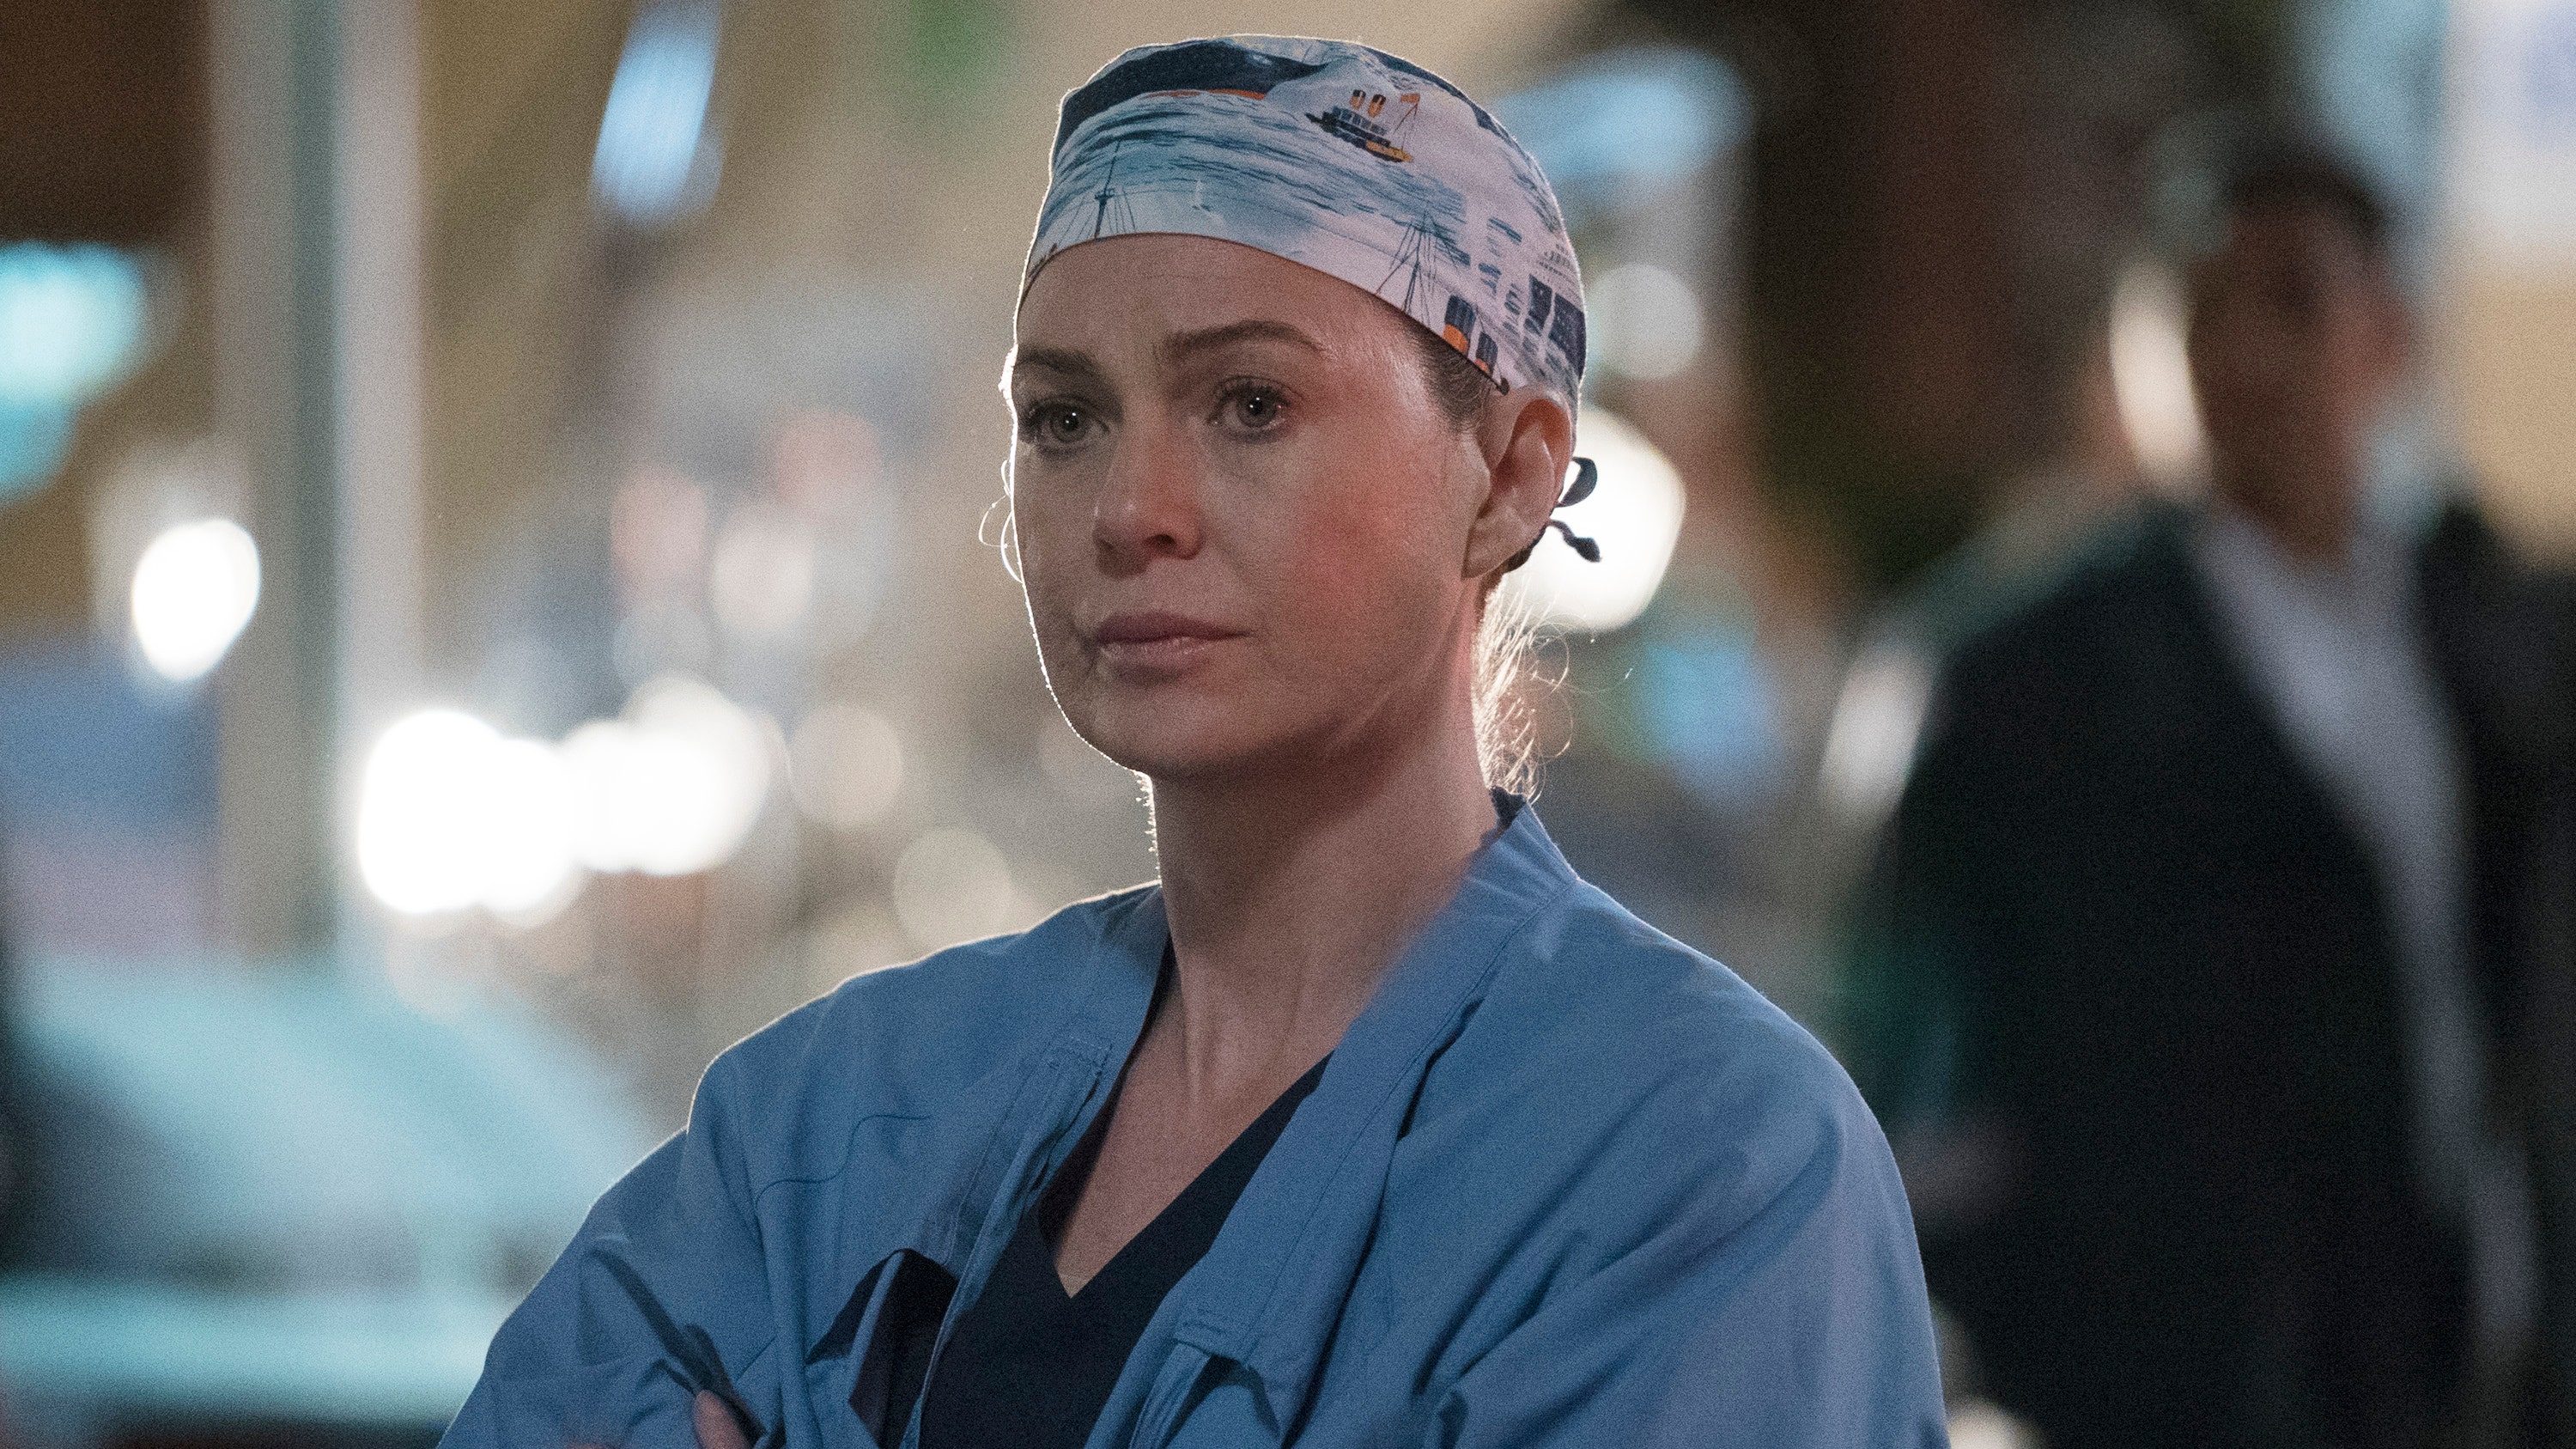 Grey’s Anatomy fans surprised by character’s death in mid-season premiere